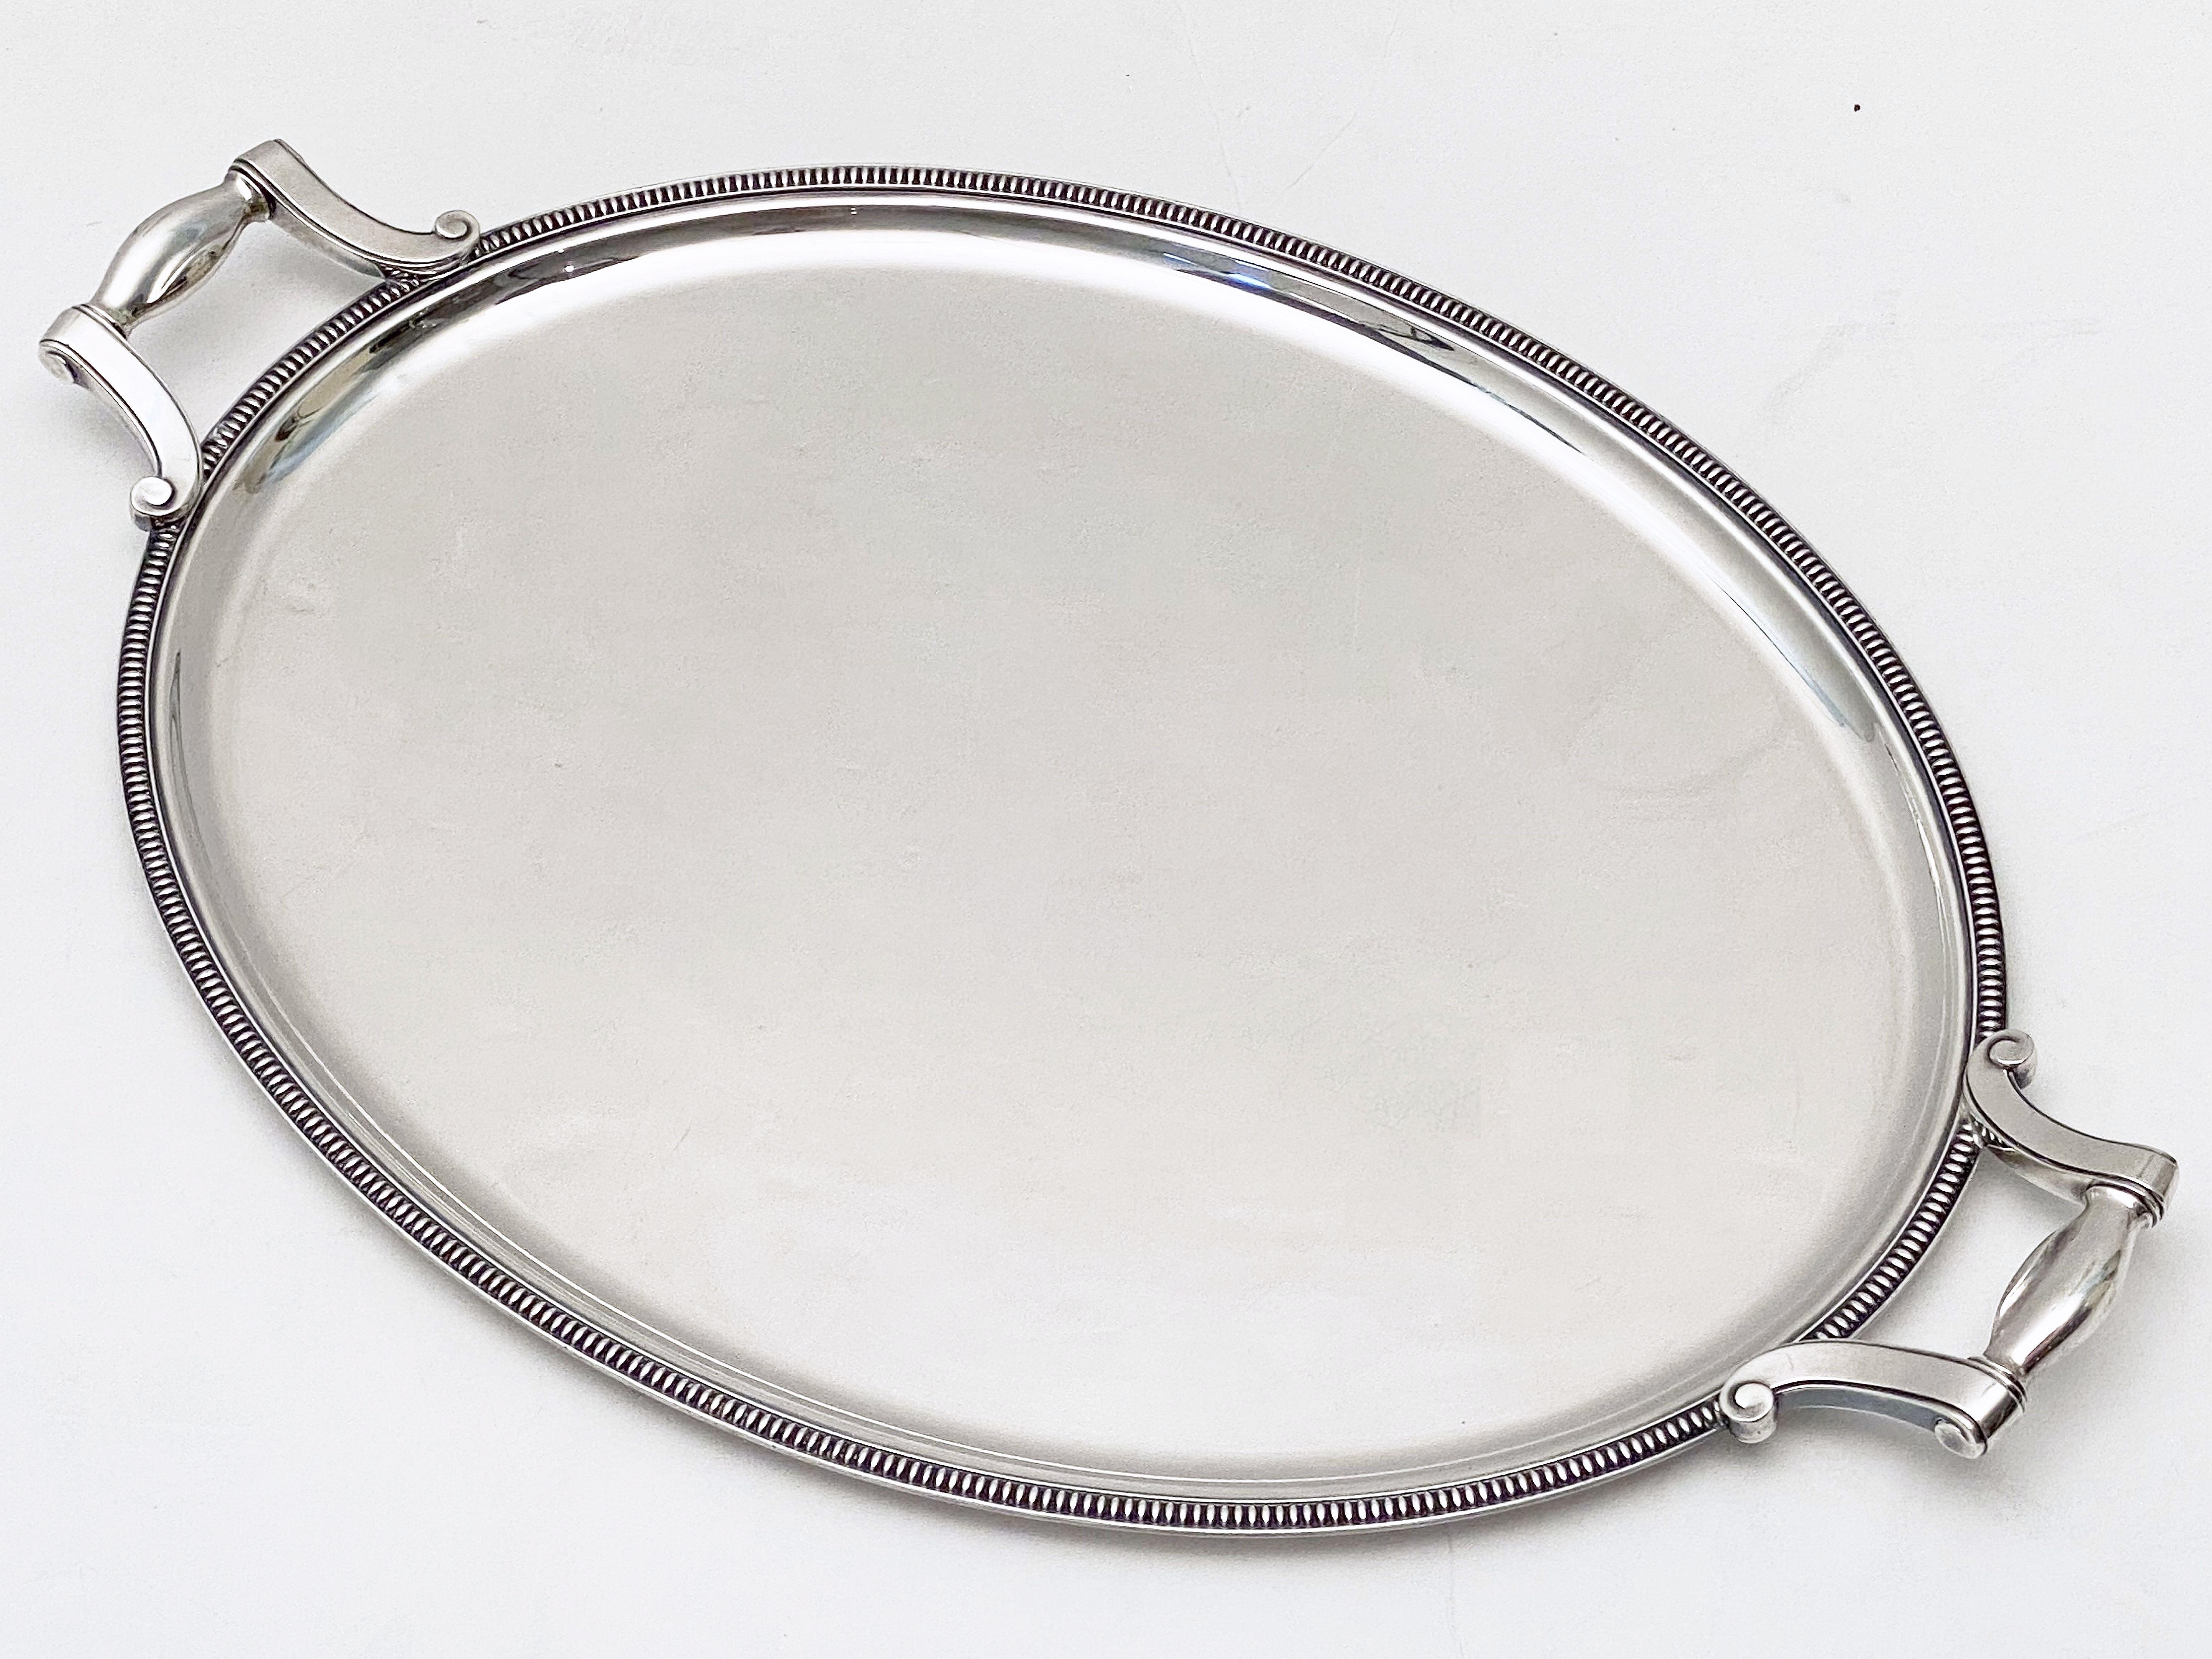 20th Century French Silver Oval Serving or Drinks Tray by Christofle